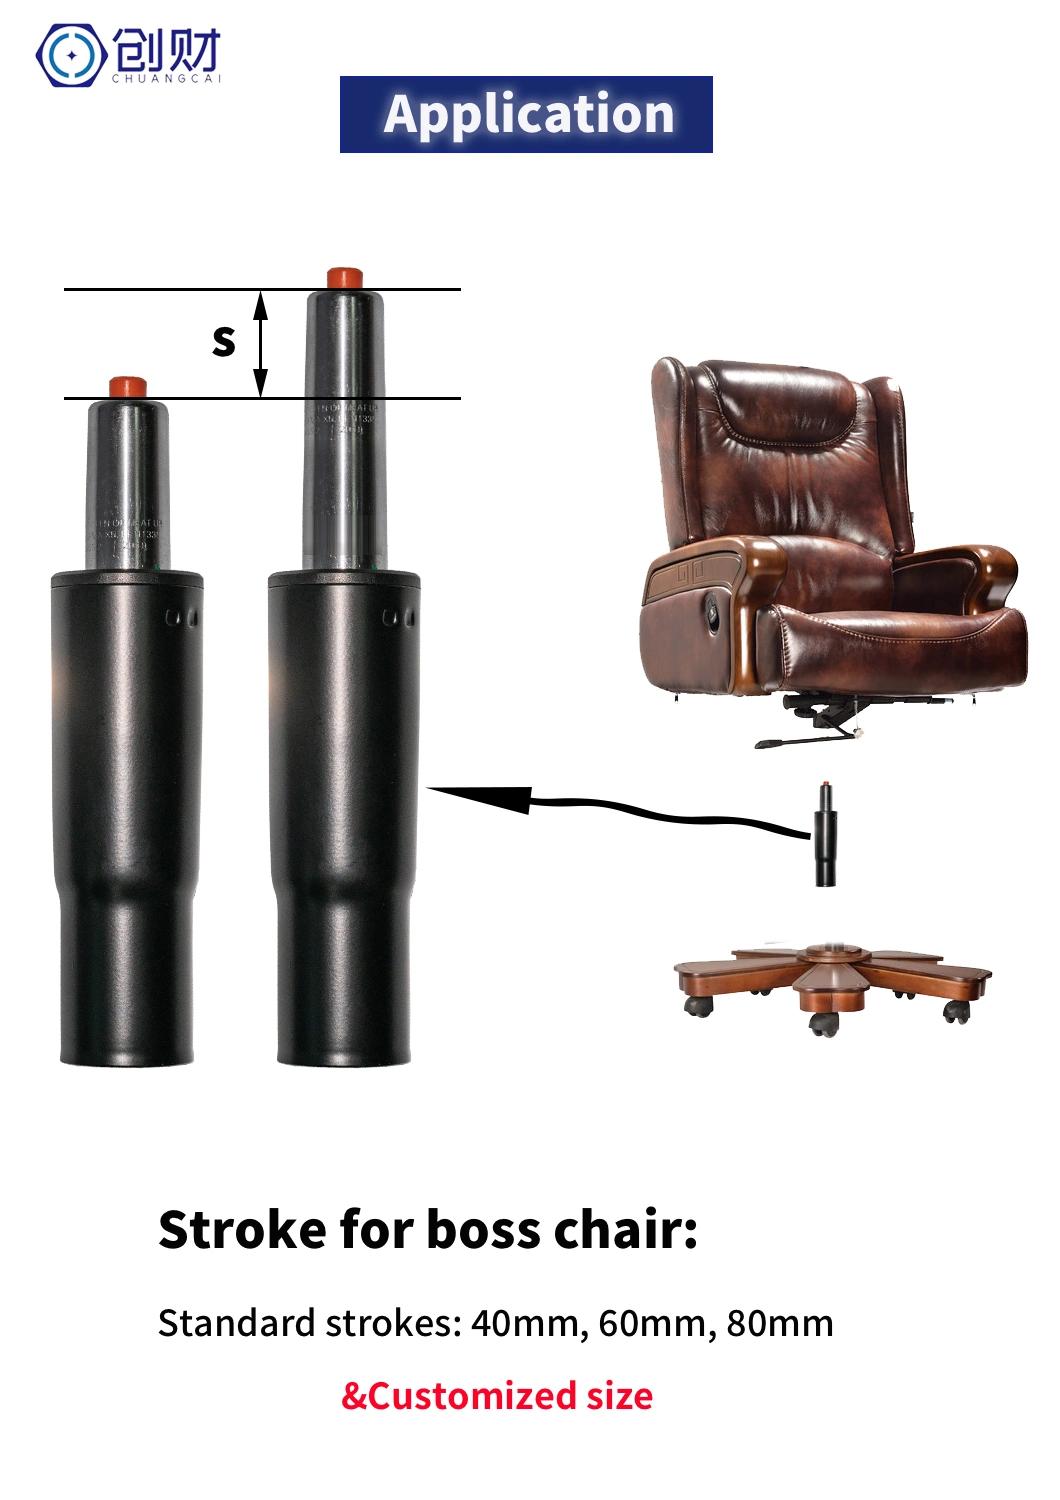 Interchangeable Auto-Return Gas Spring for Bar Chair